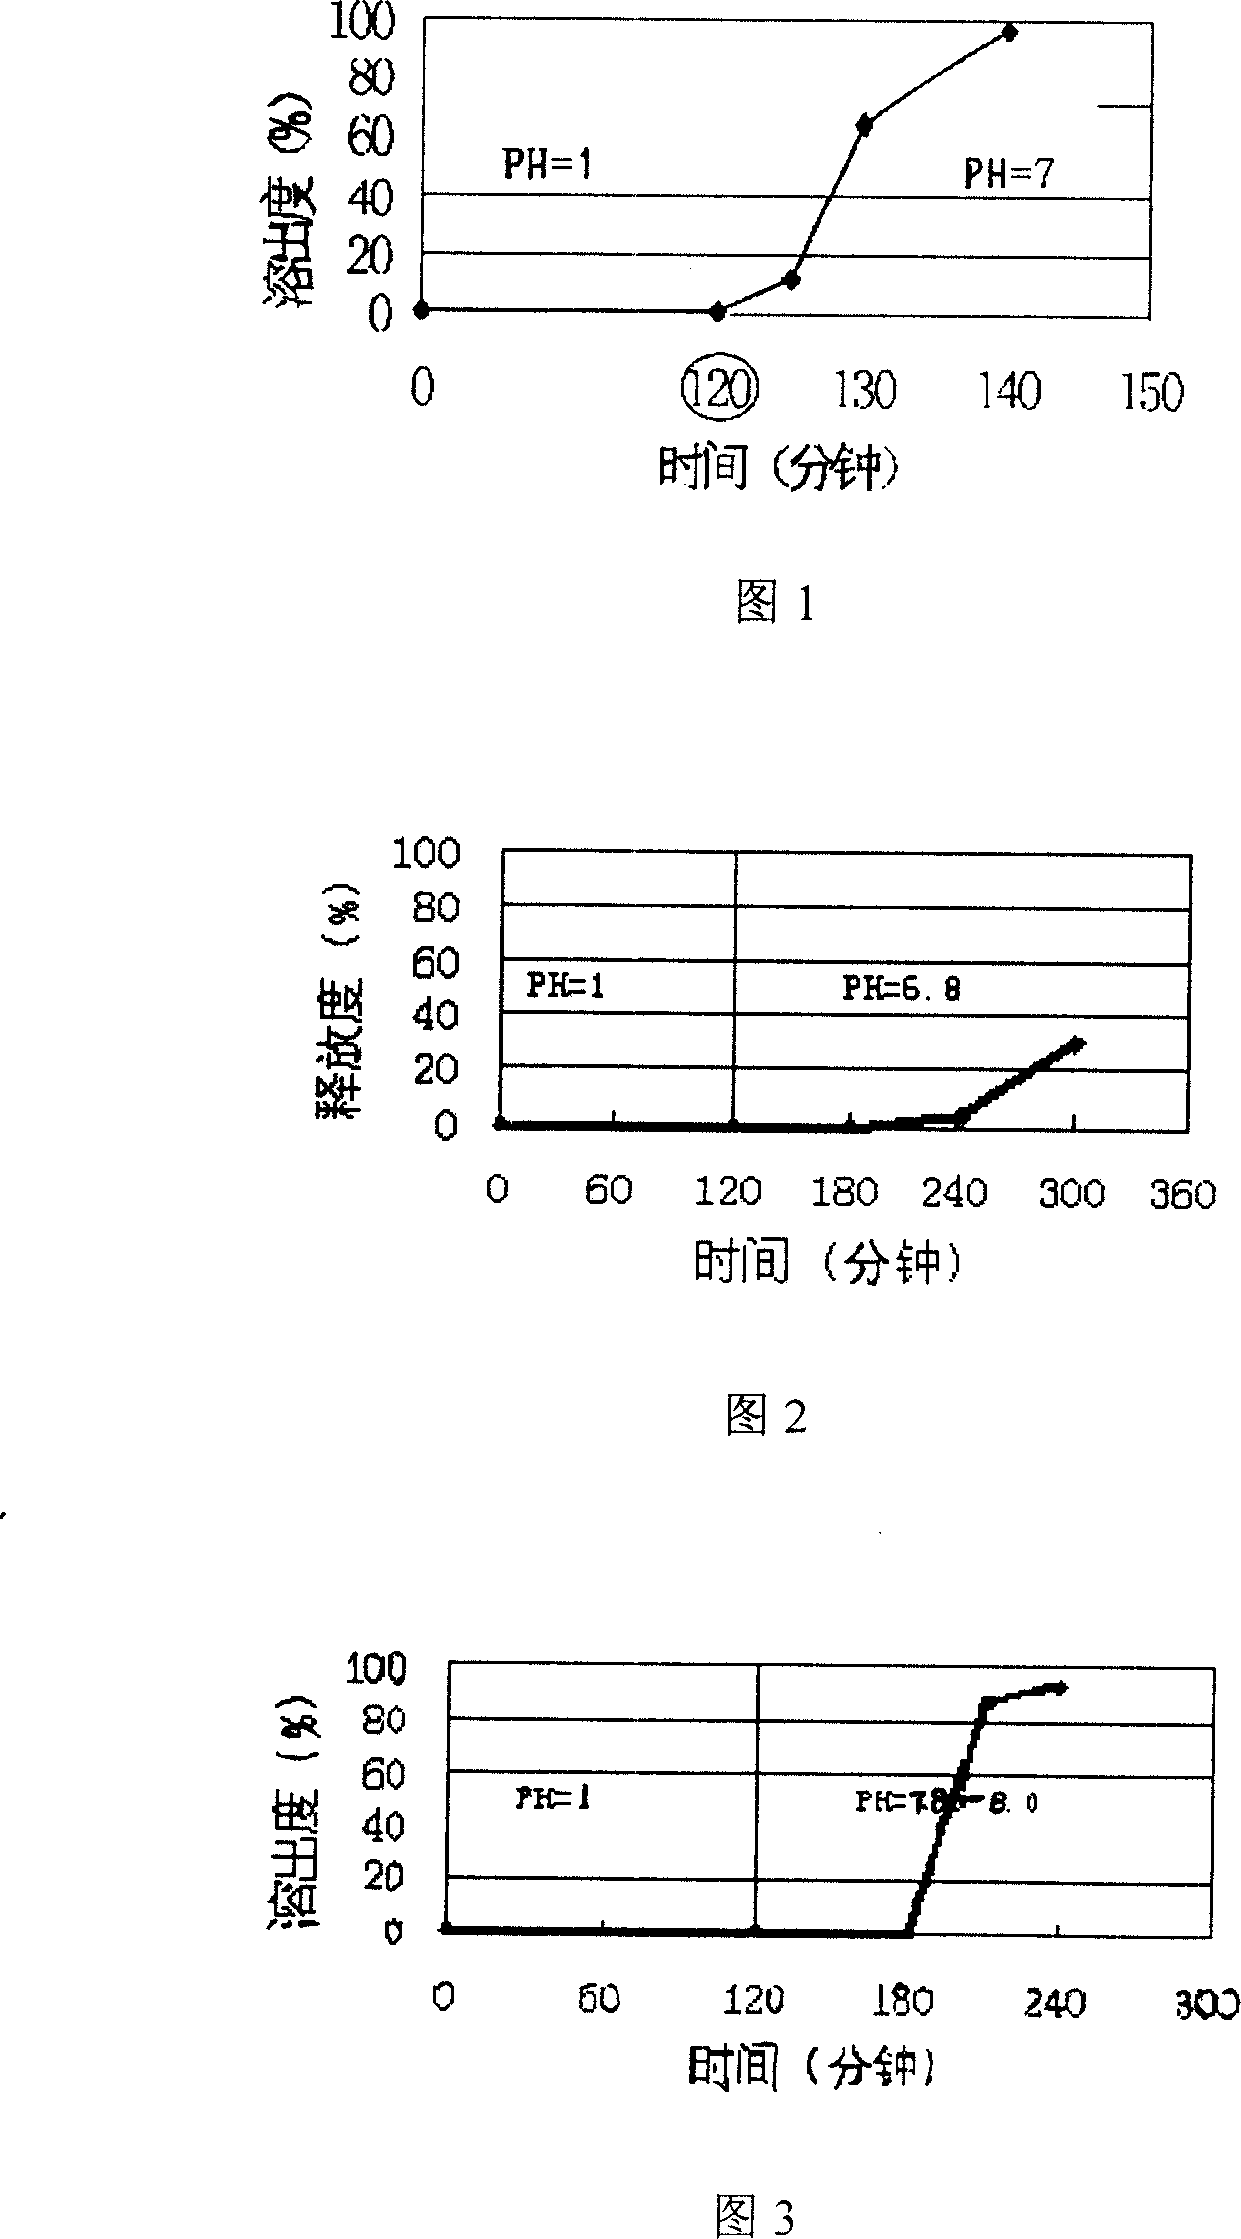 Thymus gland pentapeptide oral intestine-dissolved formulated product and method of preparing the same and use thereof